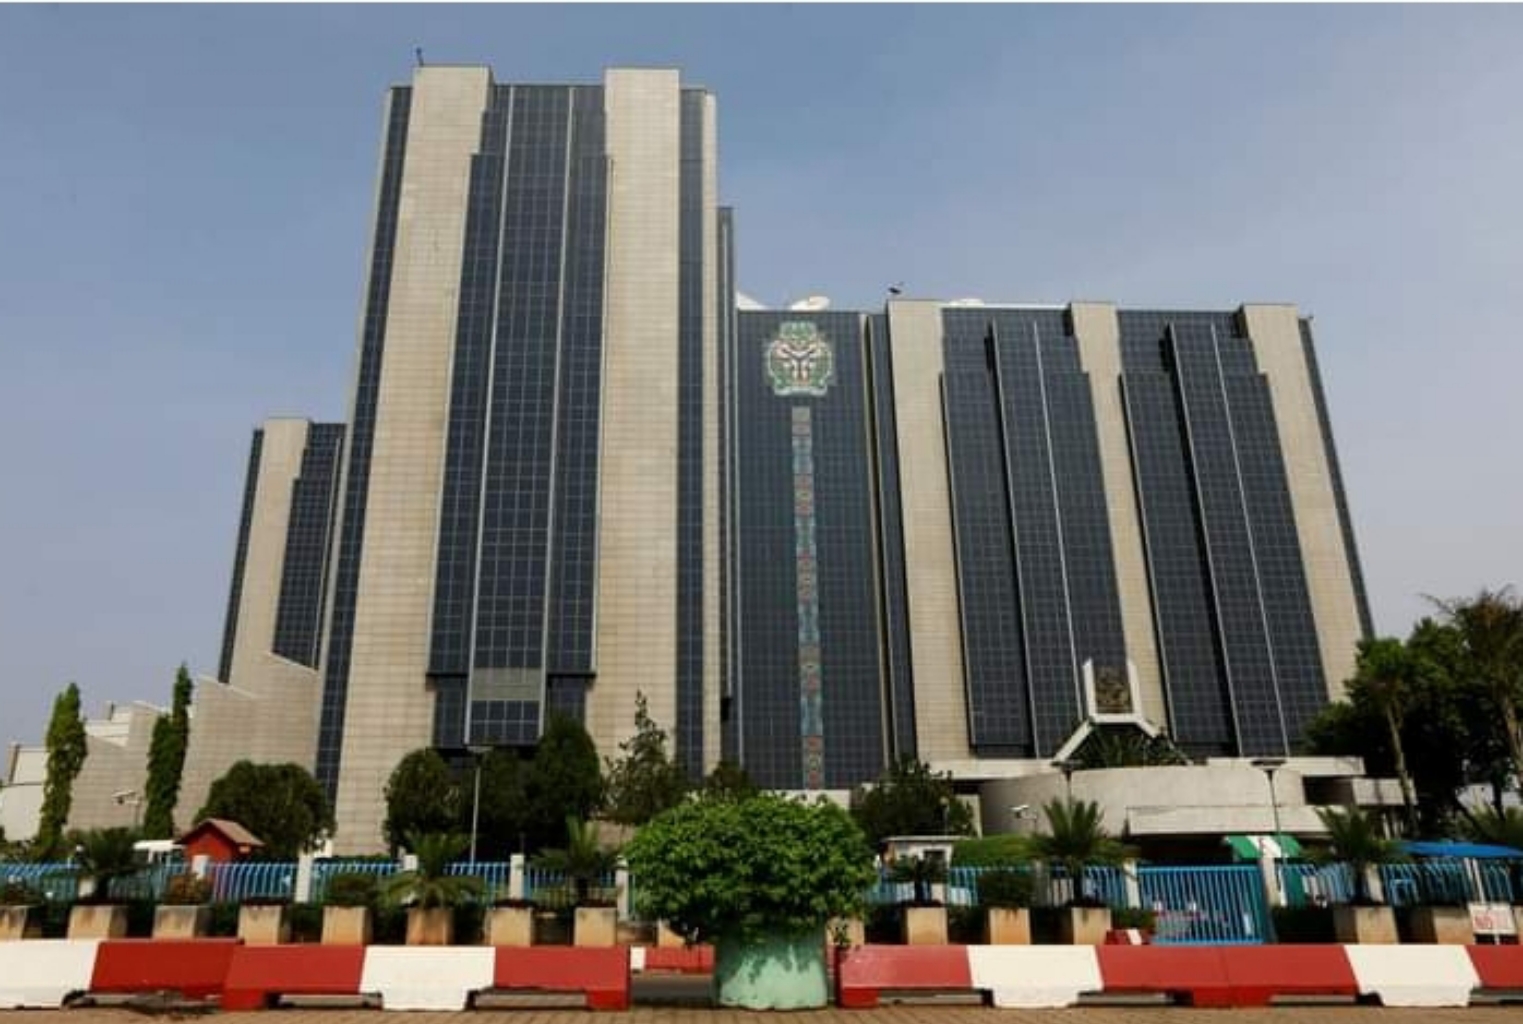 NIGERIA’S CENTRAL BANK EXTENDS DEADLINE TO TURN IN OLD NAIRA NOTES